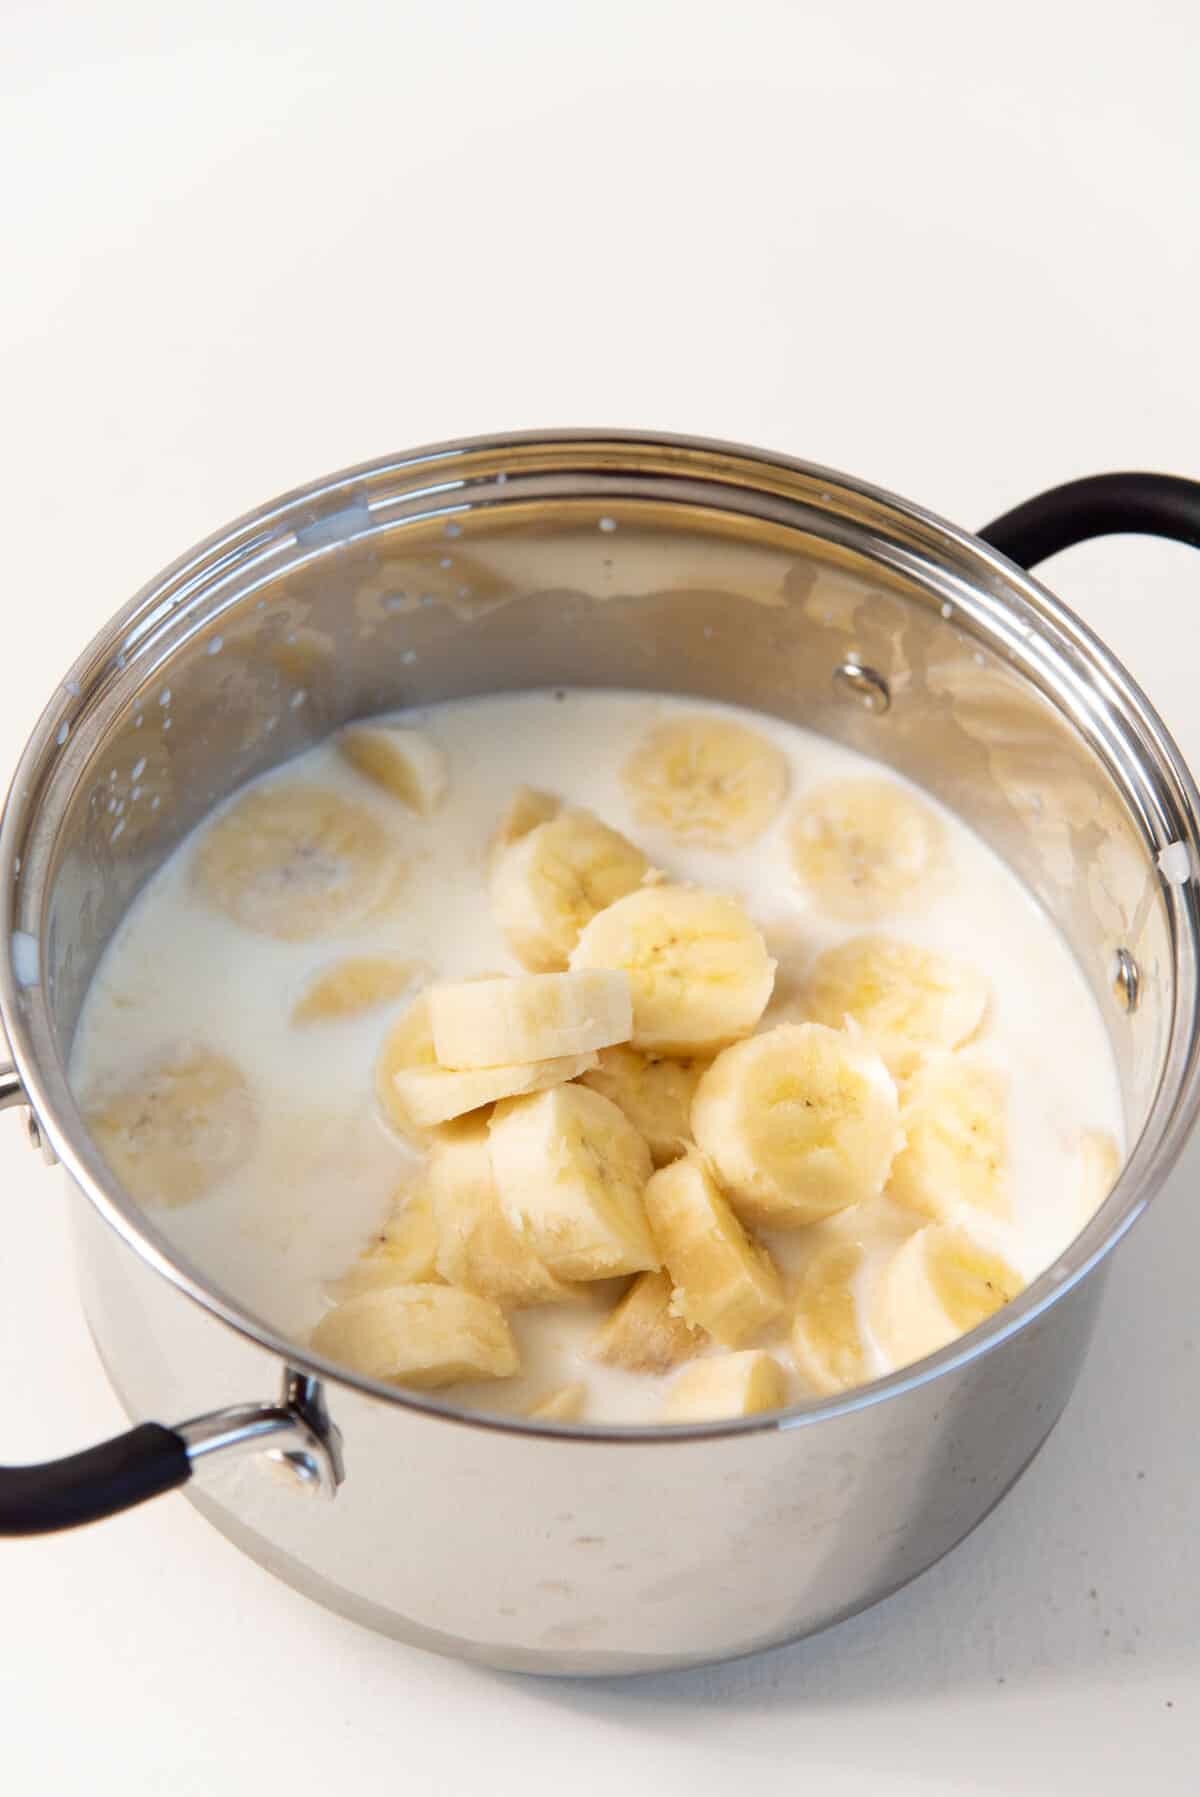 Sliced bananas in a saucepan with milk.